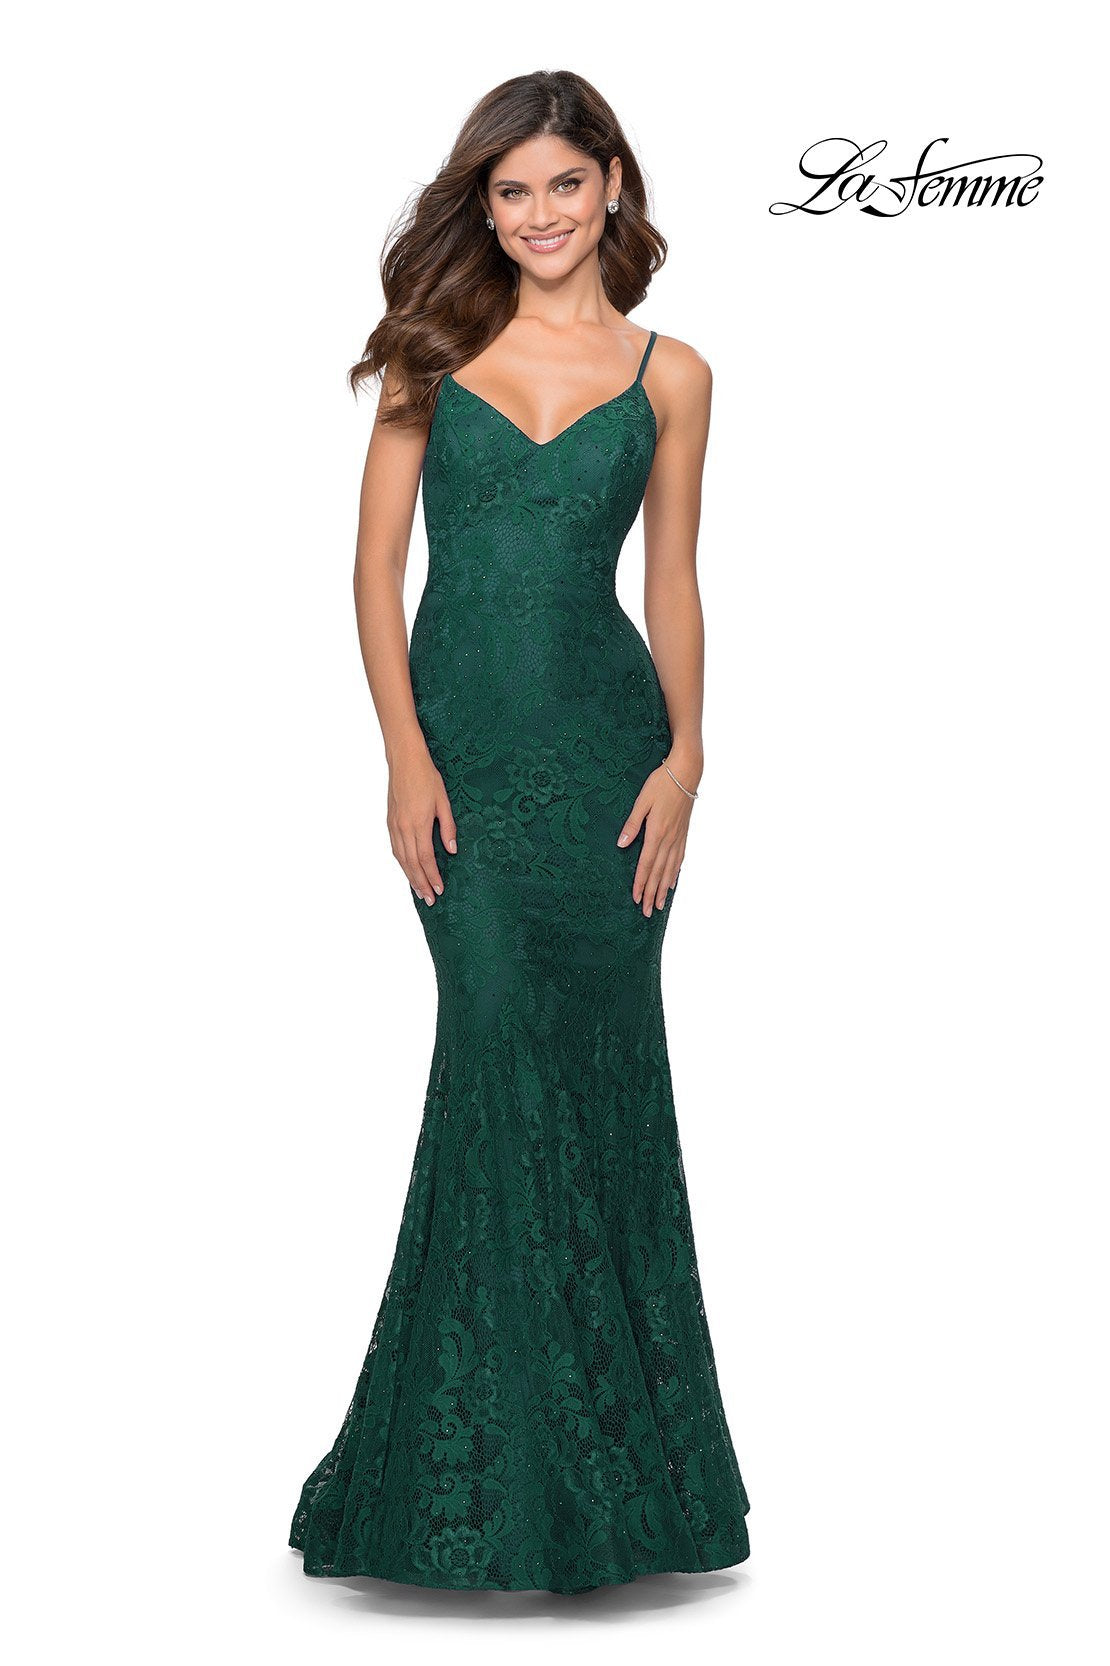 La Femme 28504 dress images in these colors: Dark Berry, Emerald, Navy, White Nude.